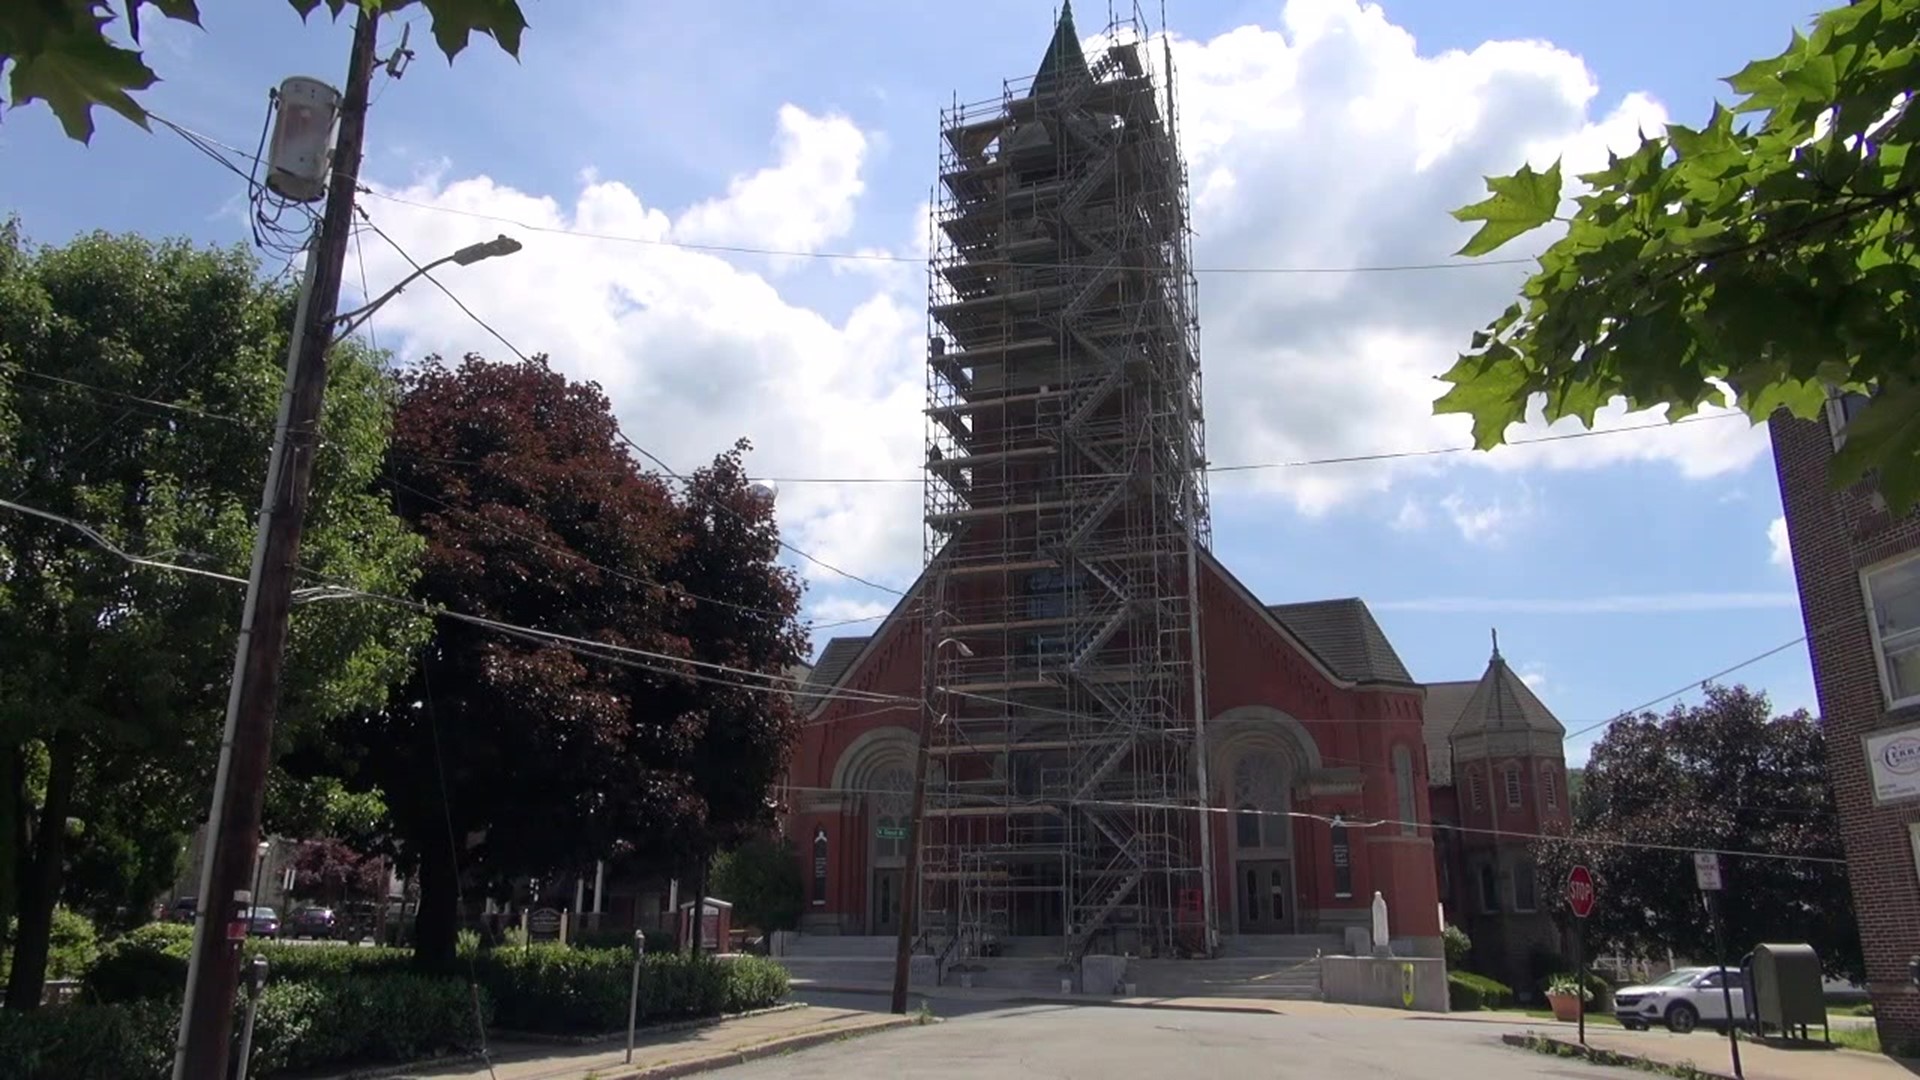 Workers are restoring a 150-year-old church in Carbondale. Not only is it one of the oldest buildings in the Pioneer City, it's also the tallest.